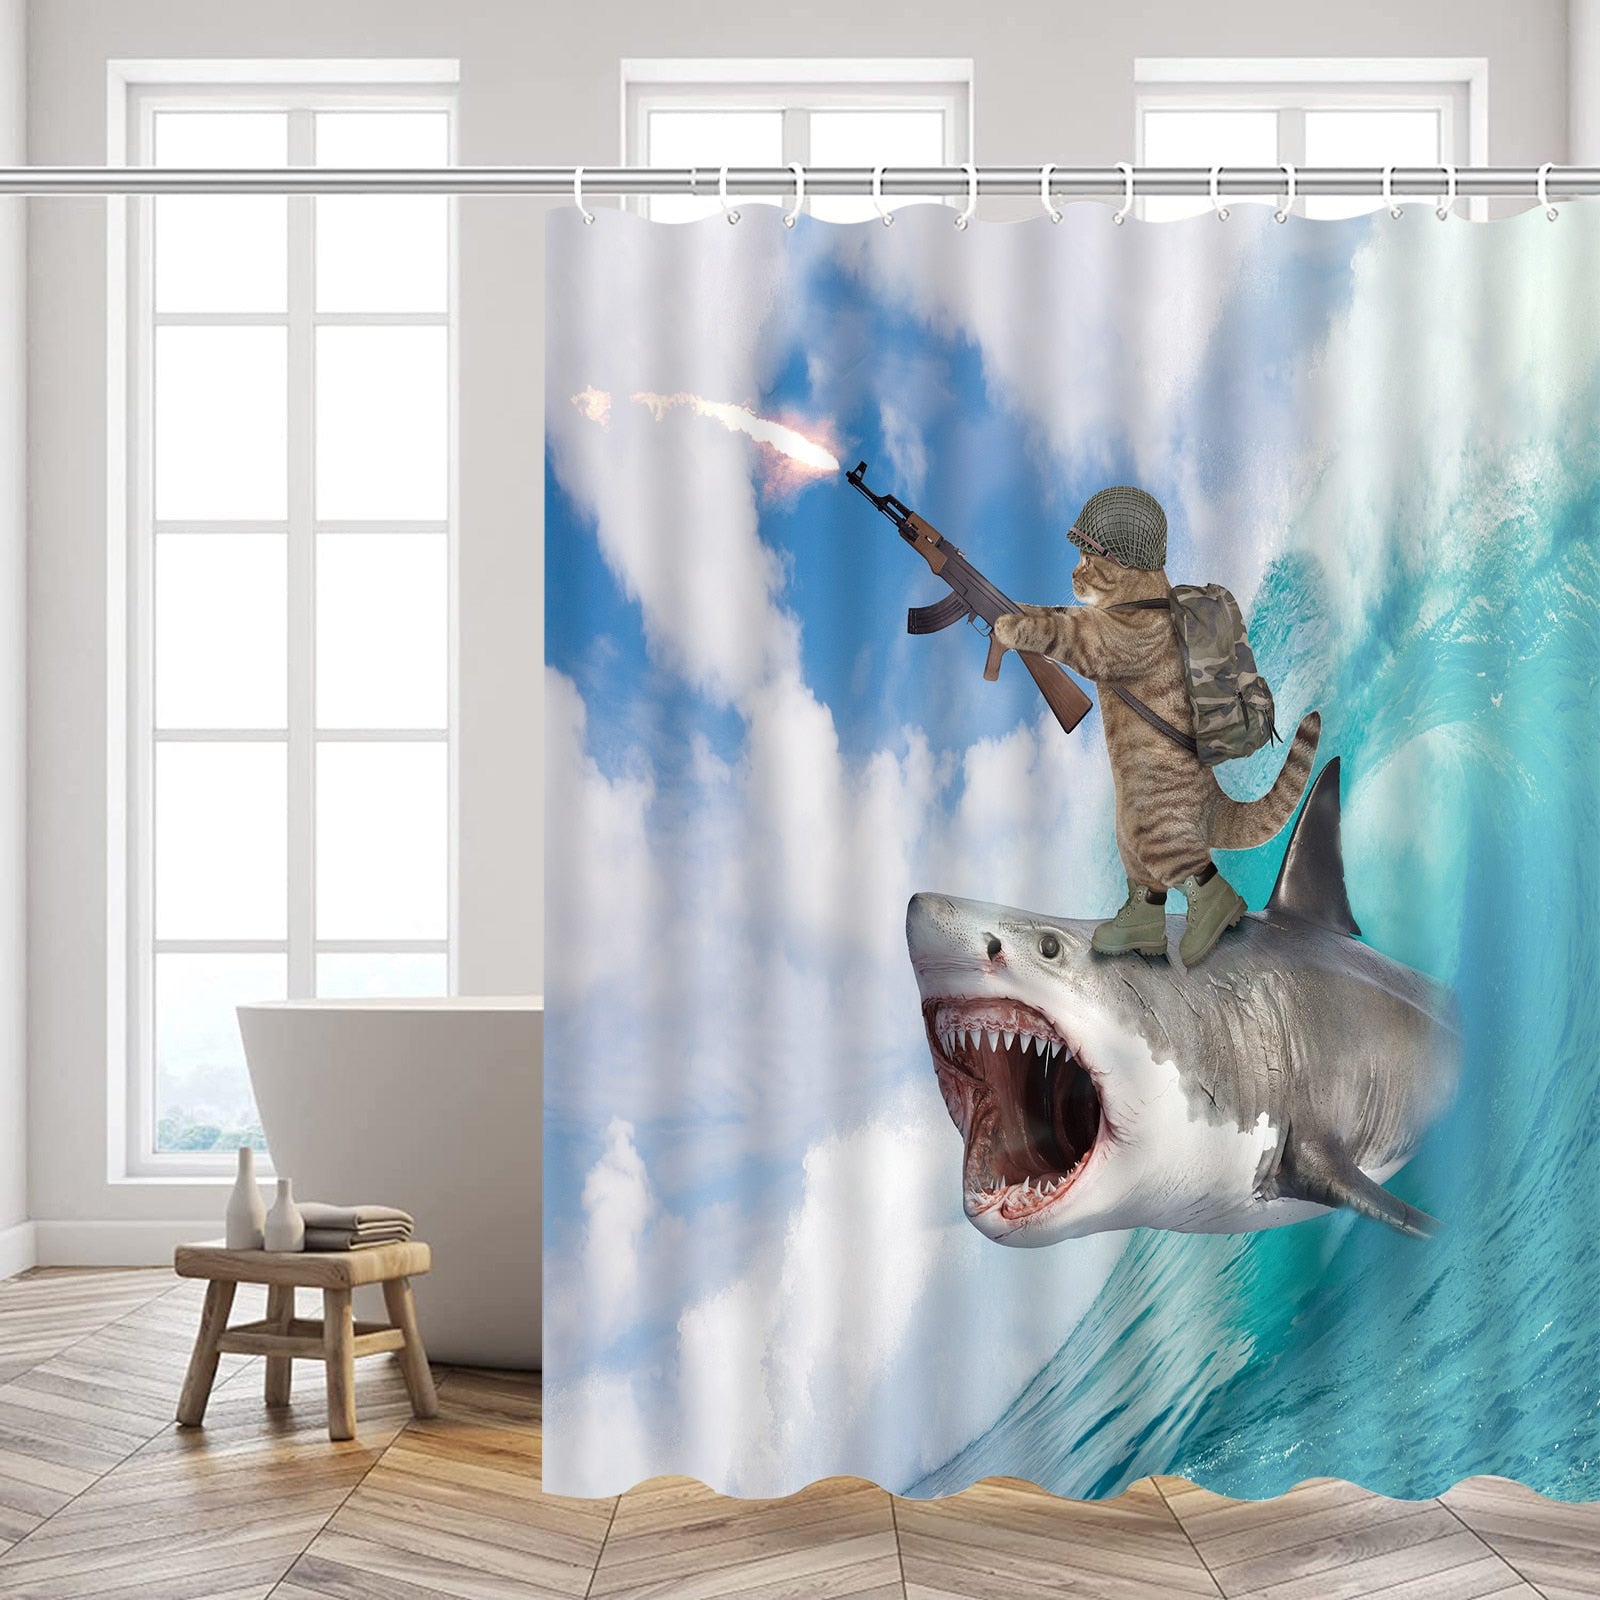 Cat Riding Whale Shower Curtain - Fly / 90x180cm-35x70inch